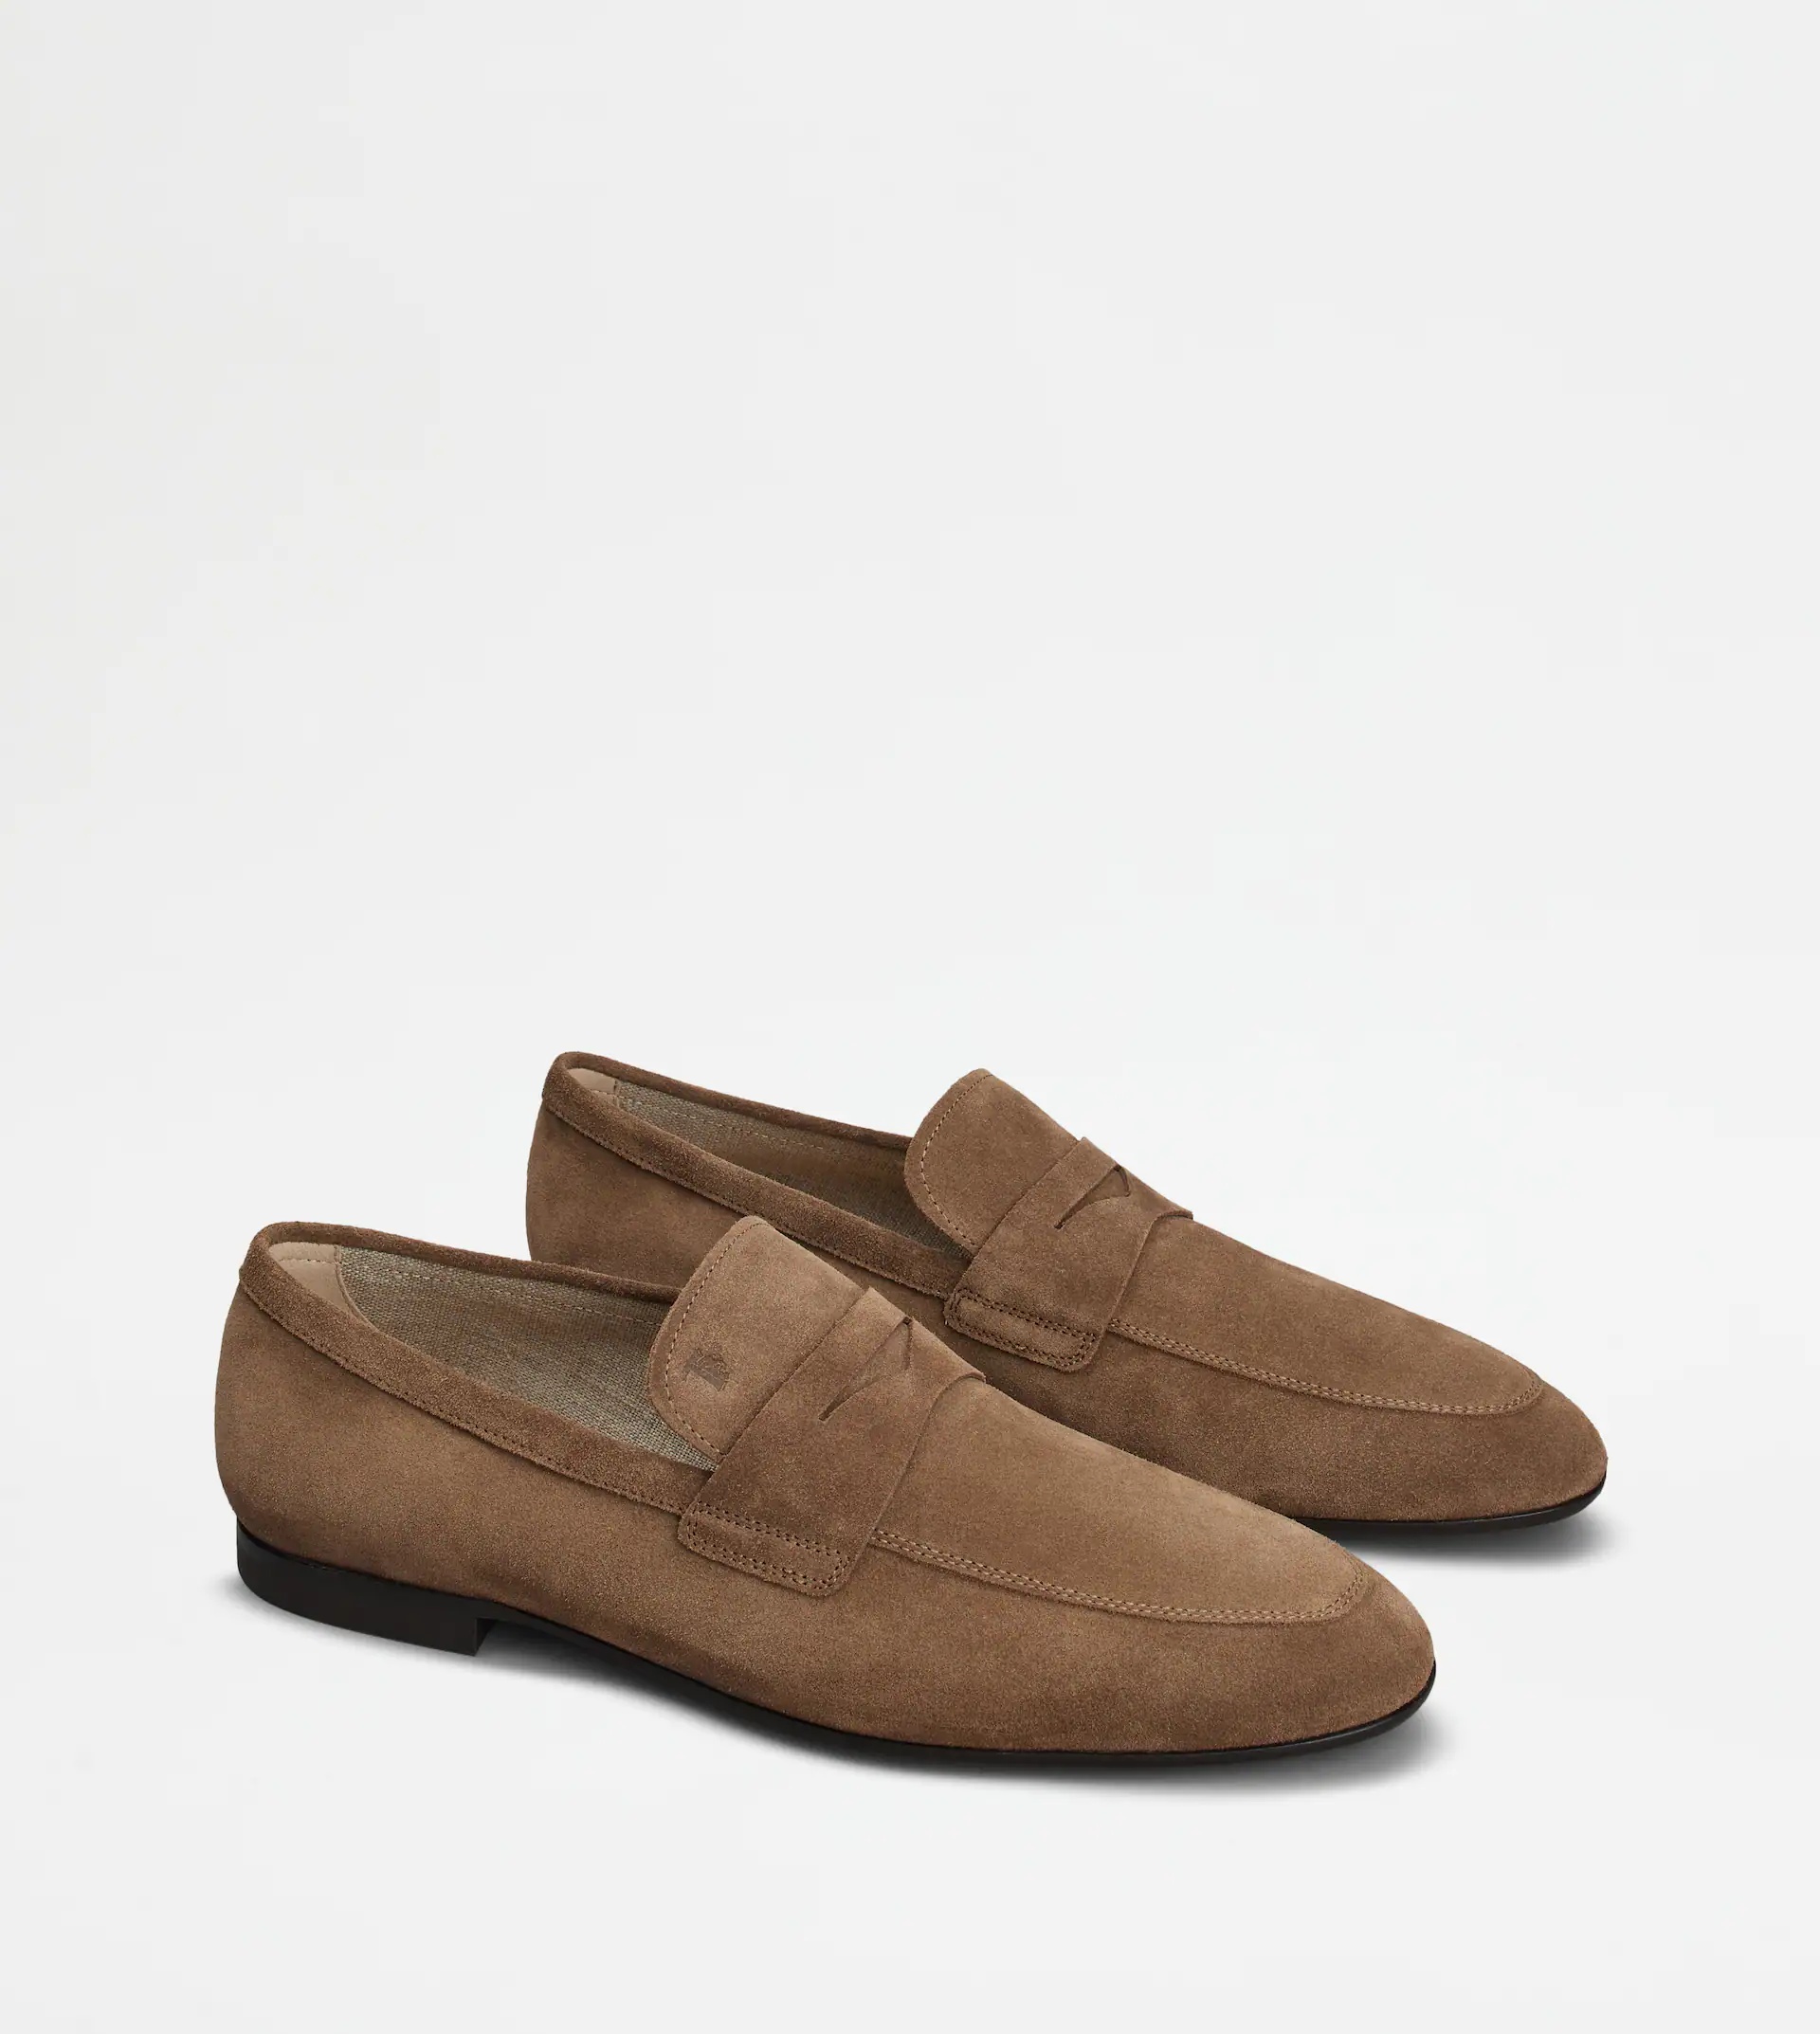 TOD'S LOAFERS IN SUEDE - BROWN - 3